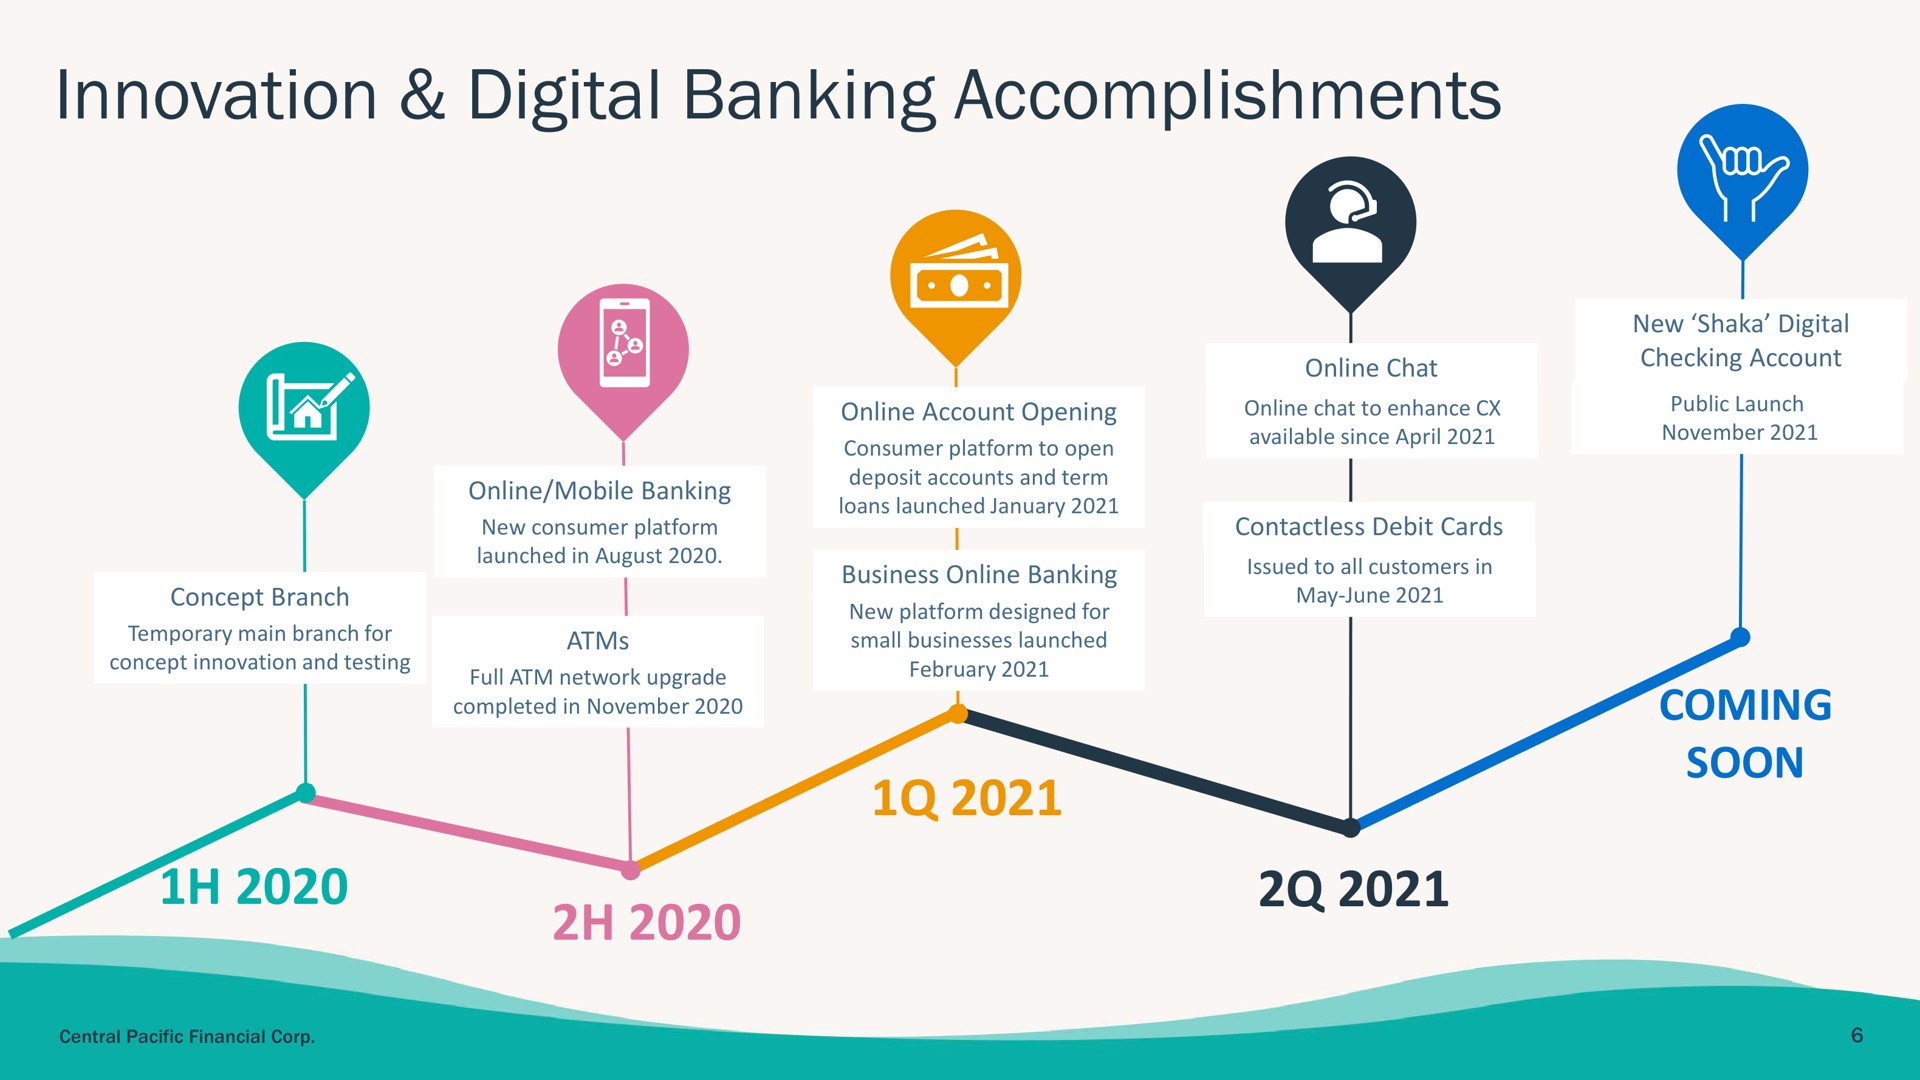 innovation digital banking accomplishments coming soon | Central Pacific Financial